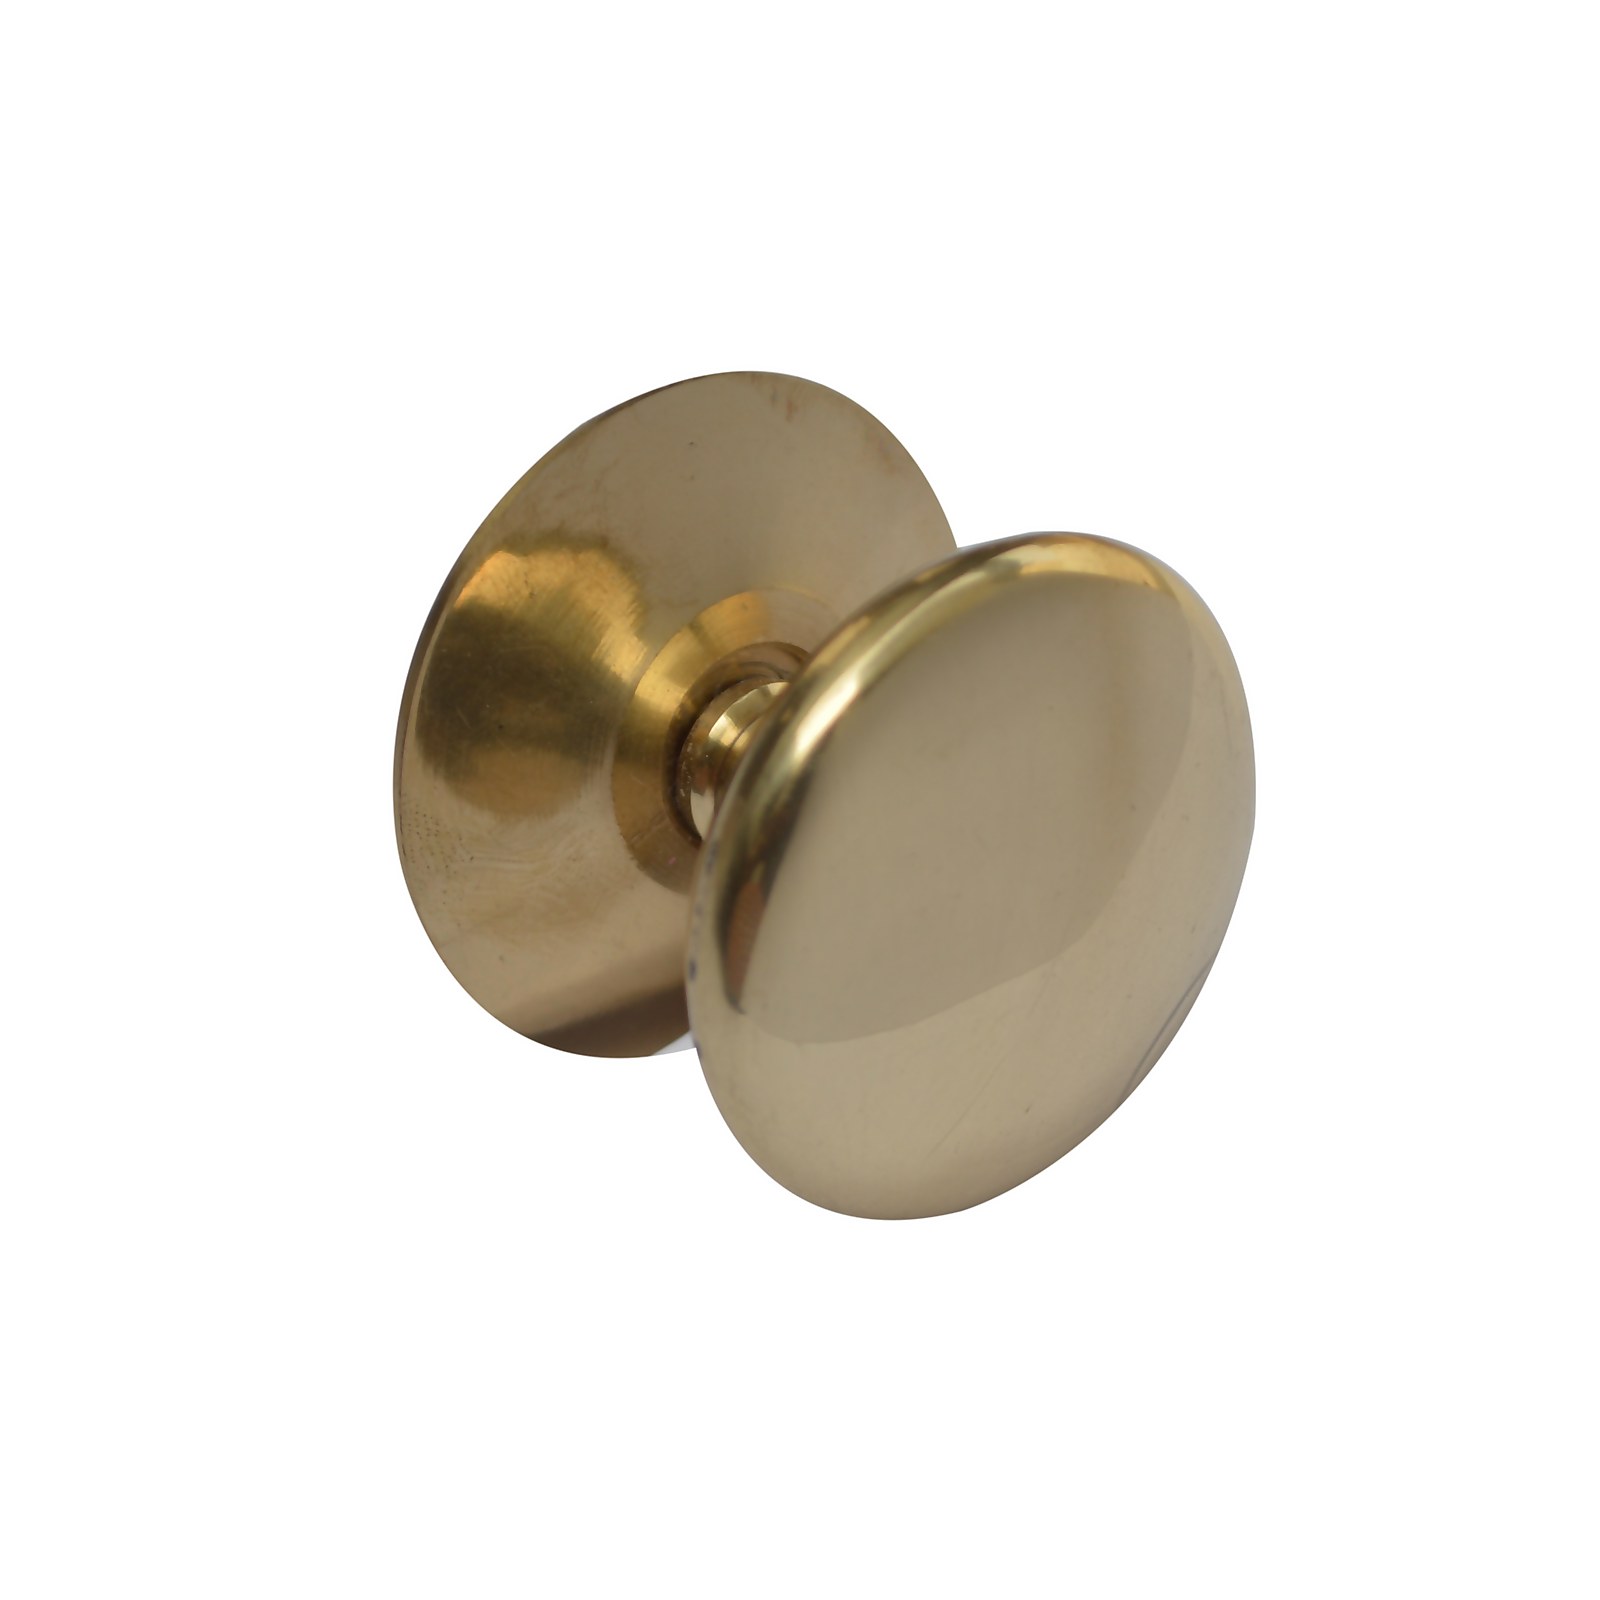 Photo of Victorian 38mm Polished Brass Cabinet Knob - 2 Pack